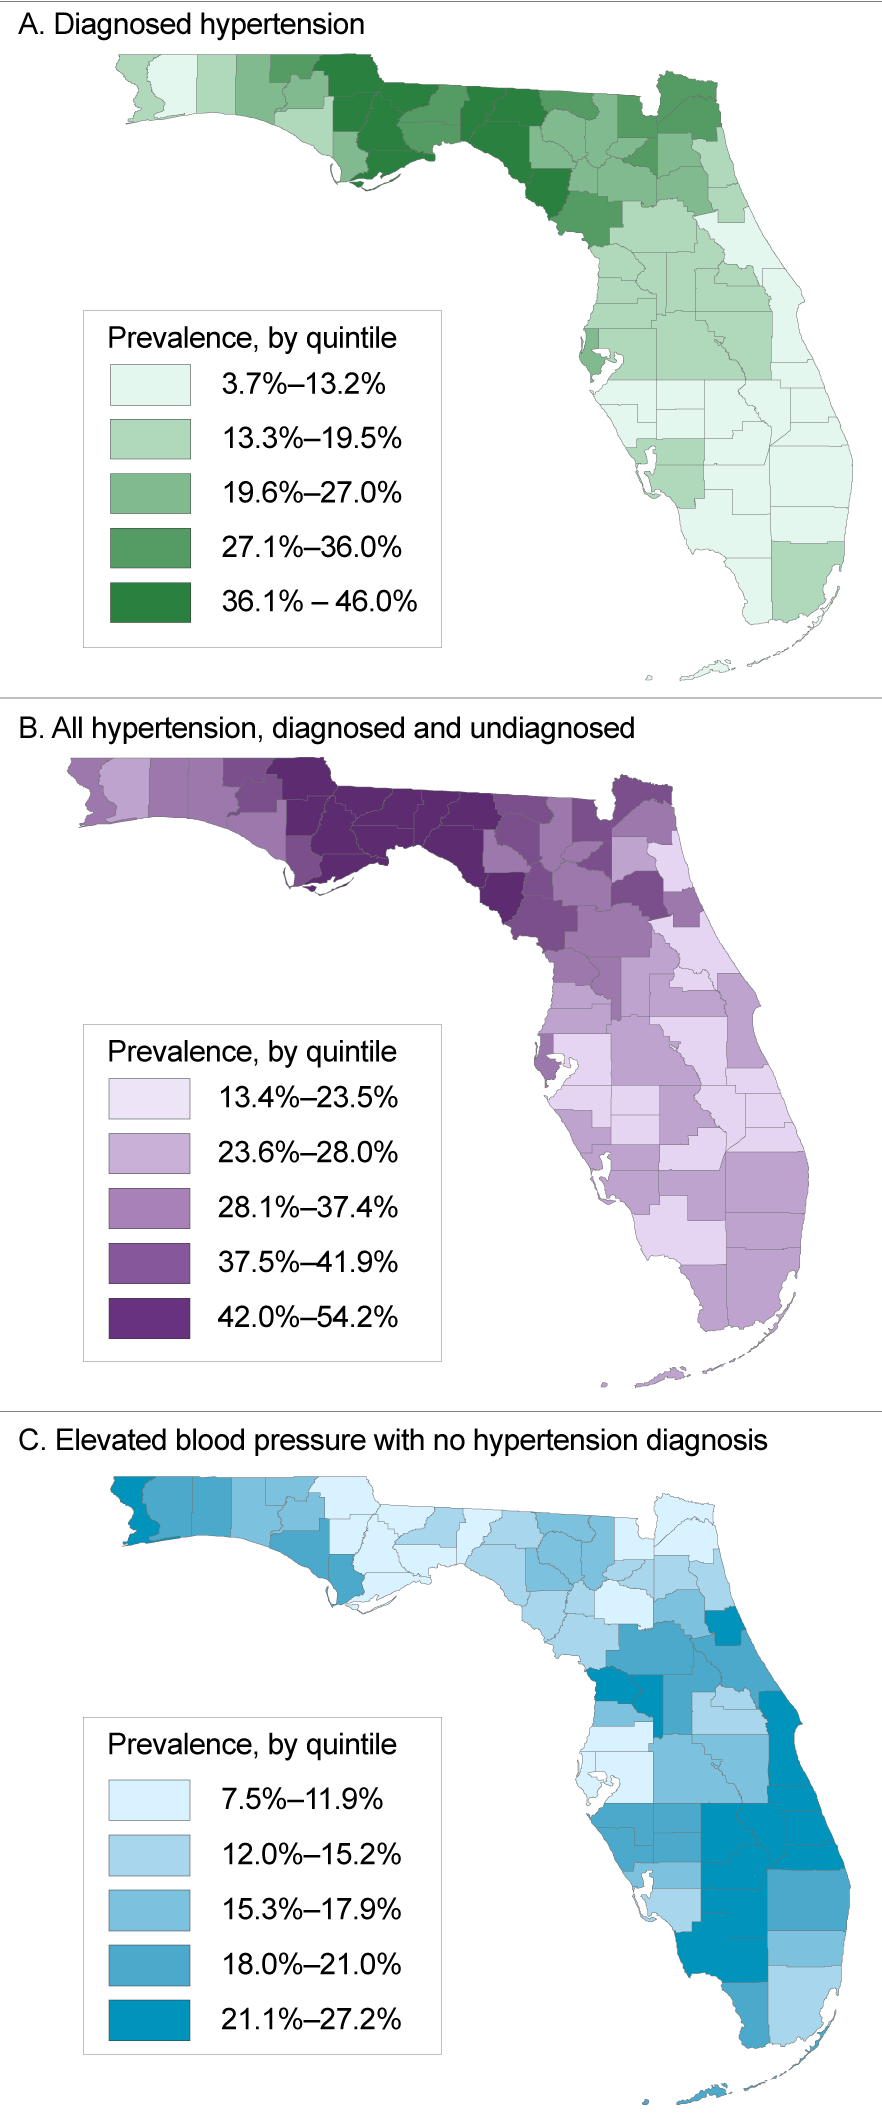 Prevalence, by quintile, of hypertension among patients with at least 1 ambulatory visit or outpatient encounter recorded from January 1, 2012, through June 30, 2016, in OneFlorida, a partnership of 11 health systems and affiliated practices in Florida, by county. Panel A, prevalence of diagnosed hypertension; panel B, prevalence of hypertension, both diagnosed and undiagnosed; panel C, prevalence of elevated blood pressure but no hypertension diagnosis.